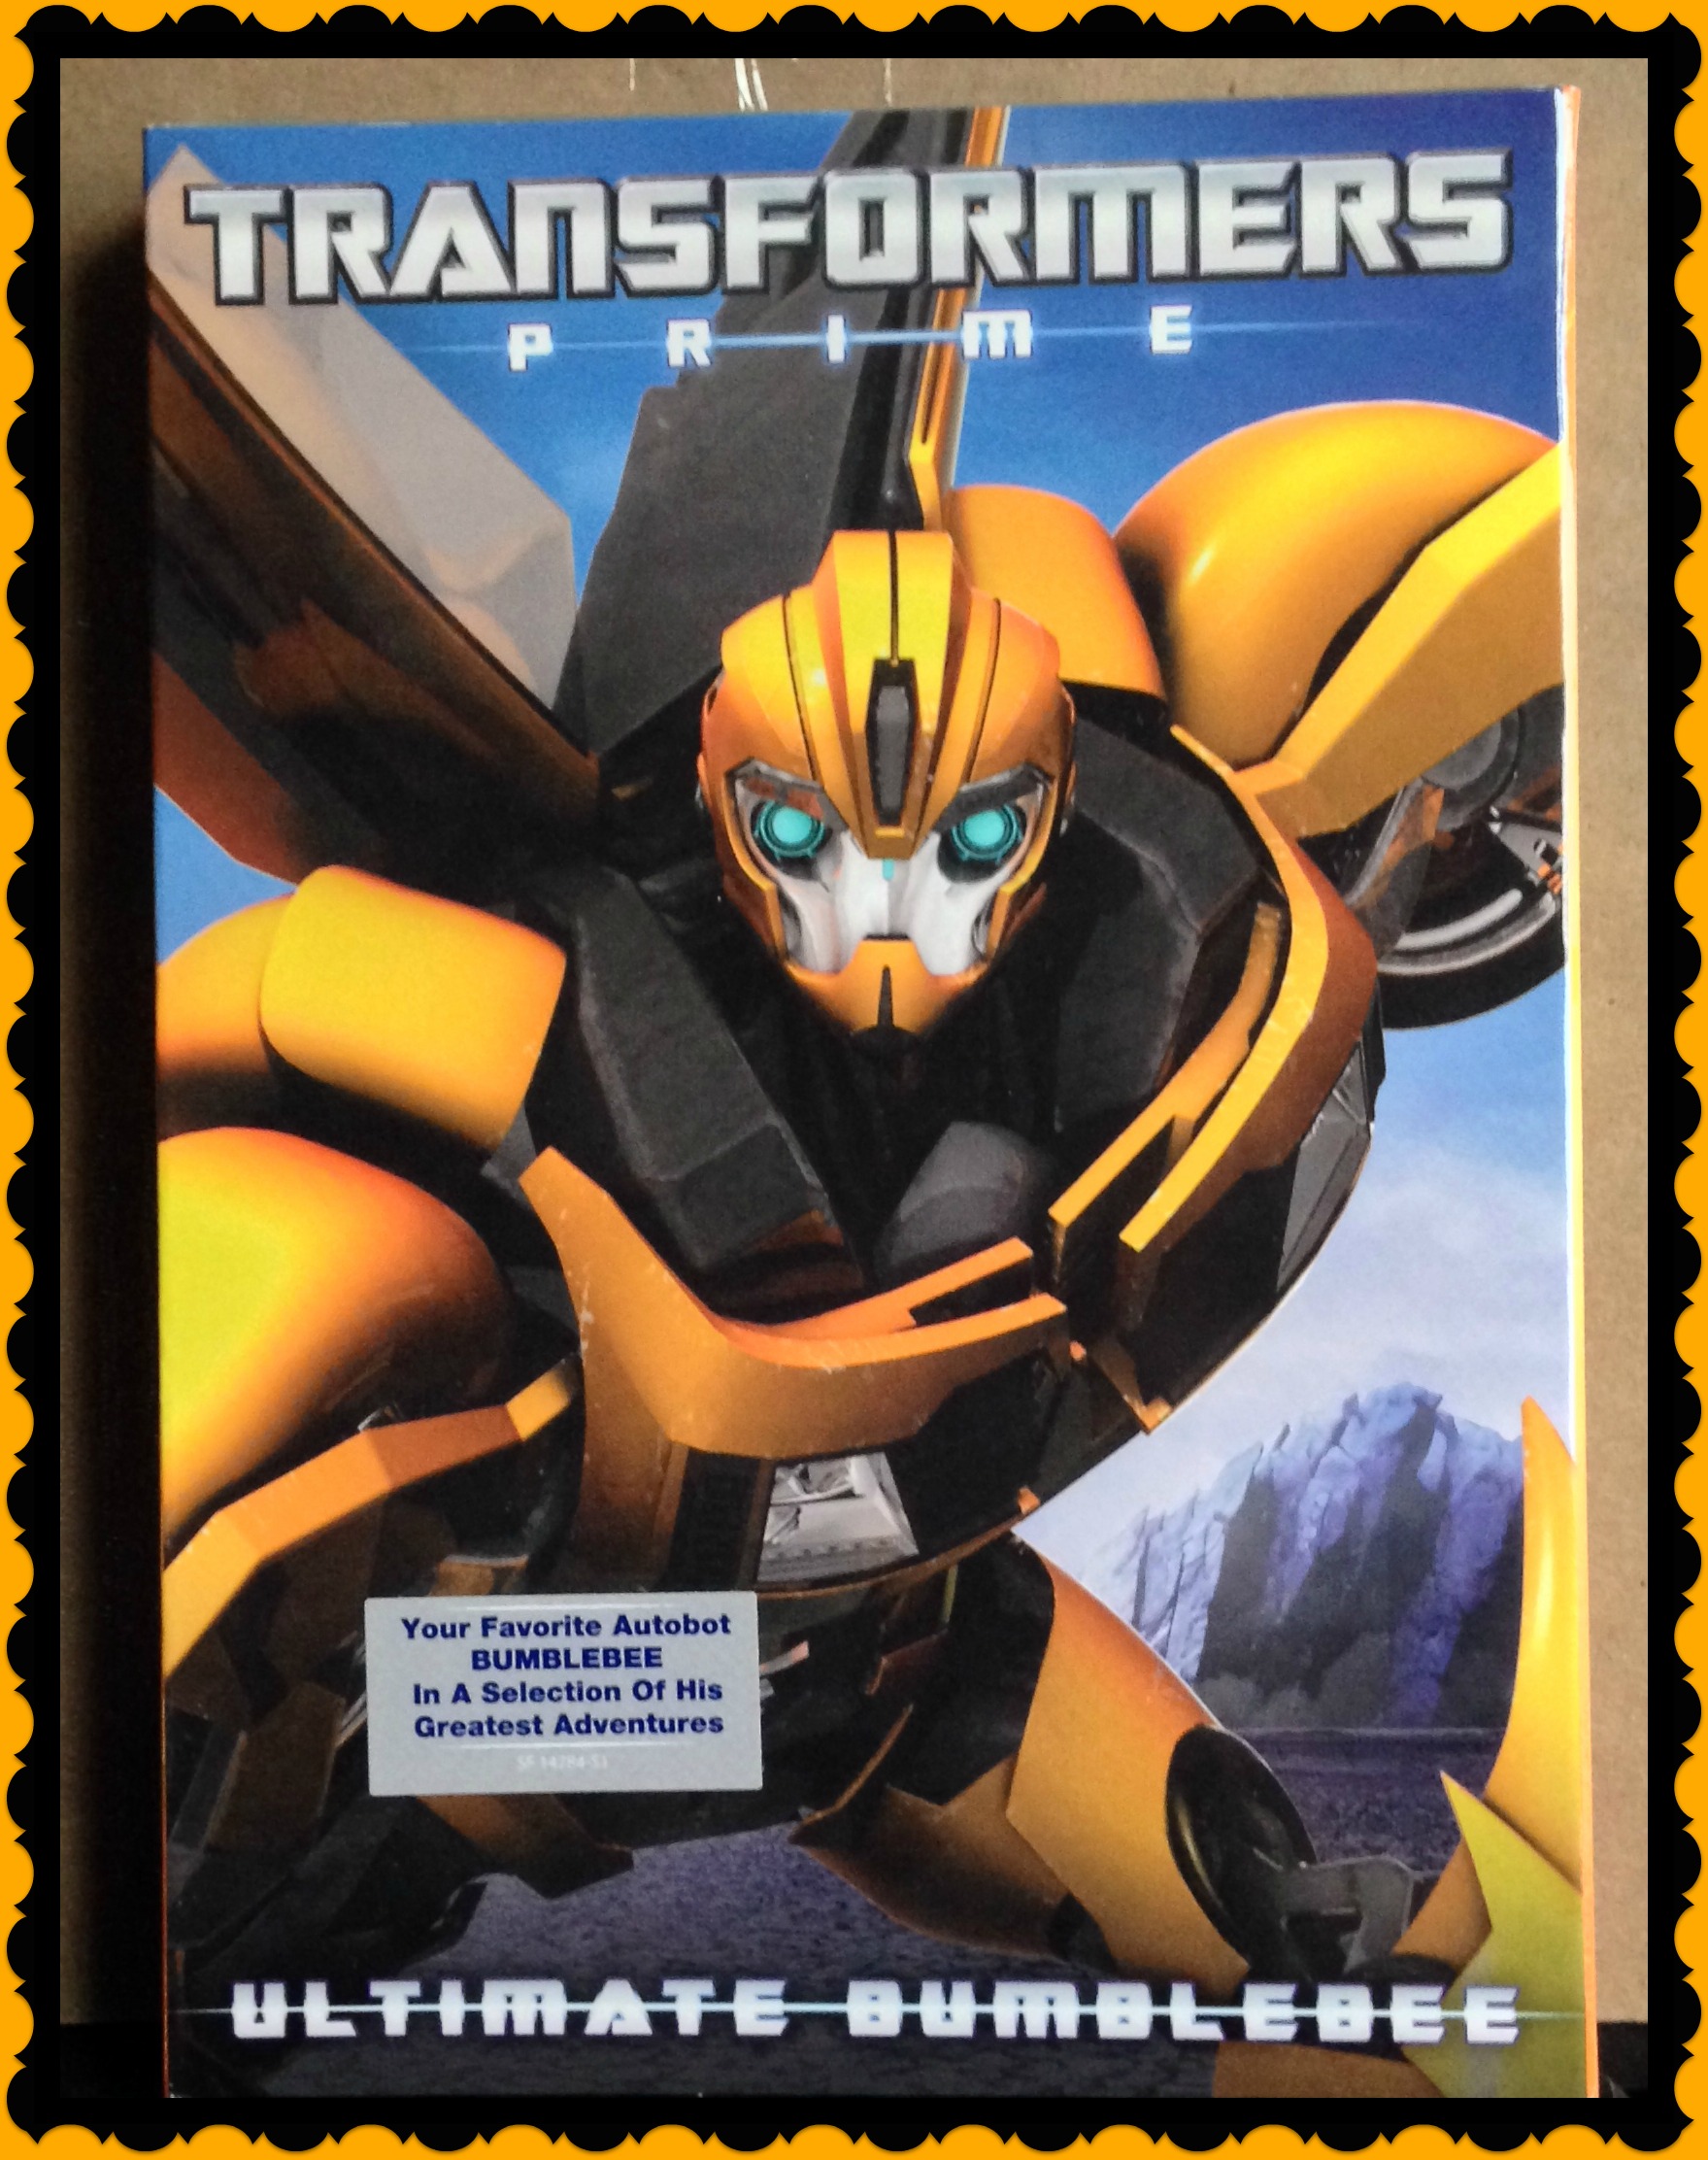 Transformers Prime: Ultimate Bumblebee on DVD February 25th - FSM